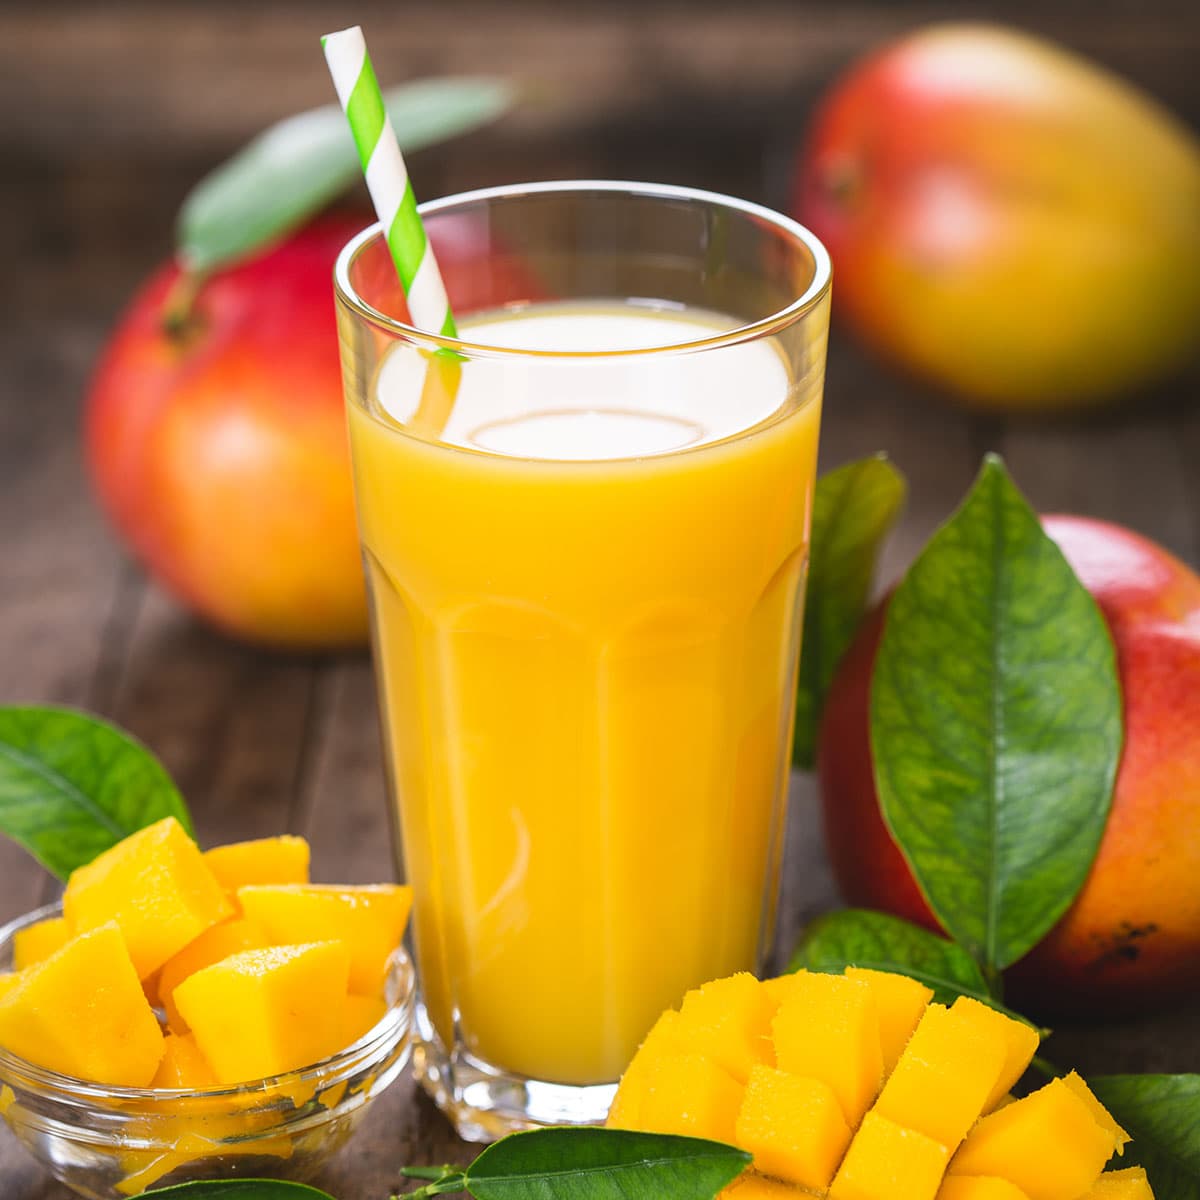 Mango Juice Recipe Made in a Blender - Clean Eating Kitchen